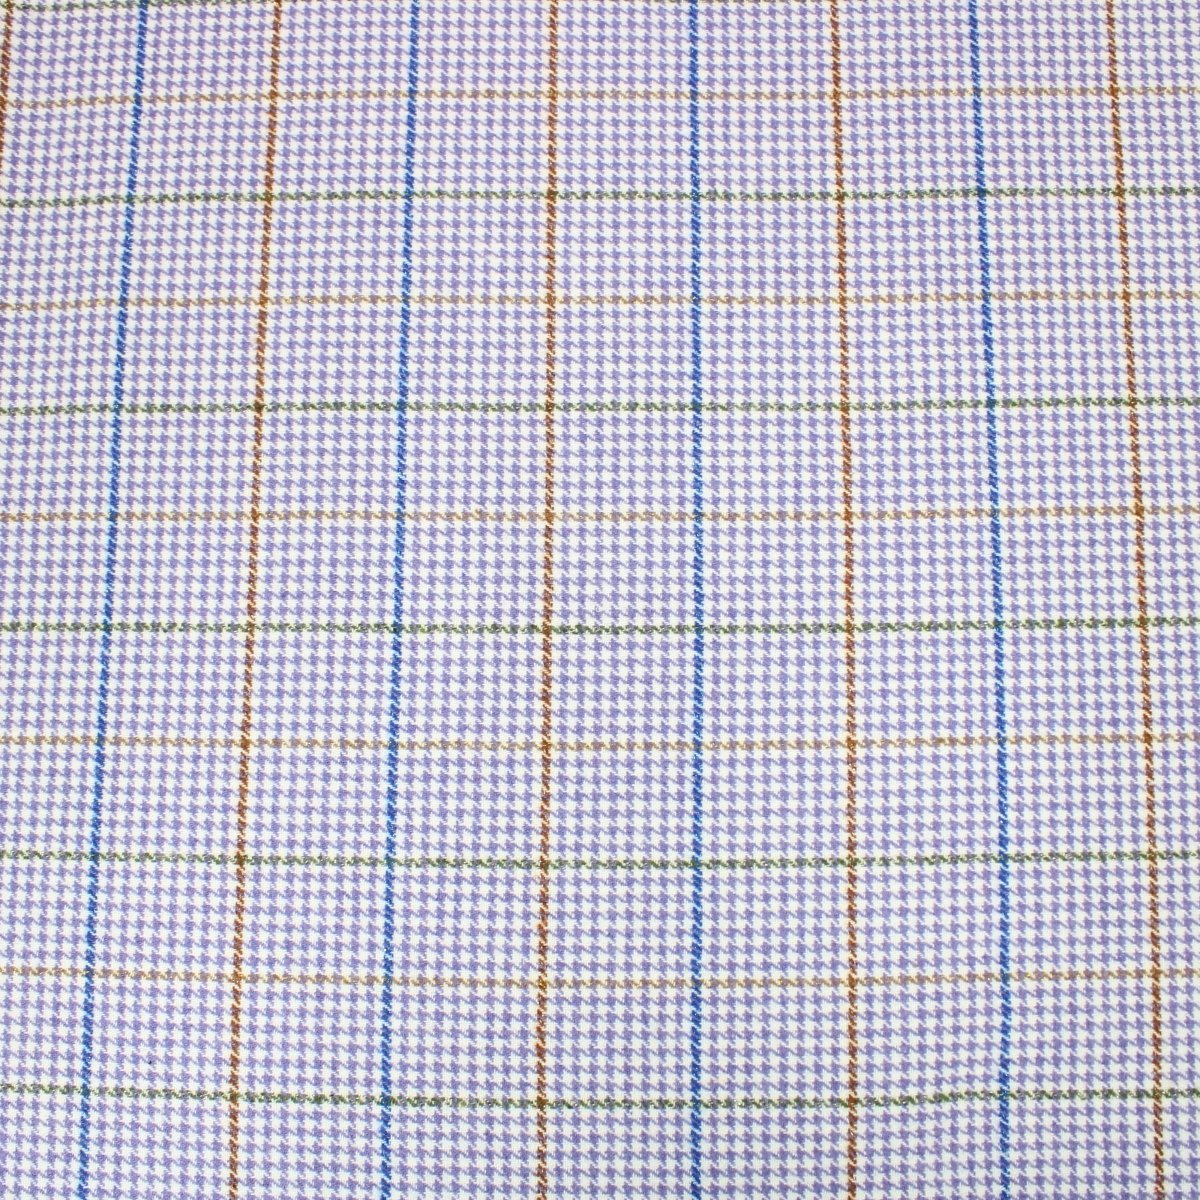 3 Metres Premium Wool Fabric 55" Wide Lilac Houndstooth - Pound A Metre